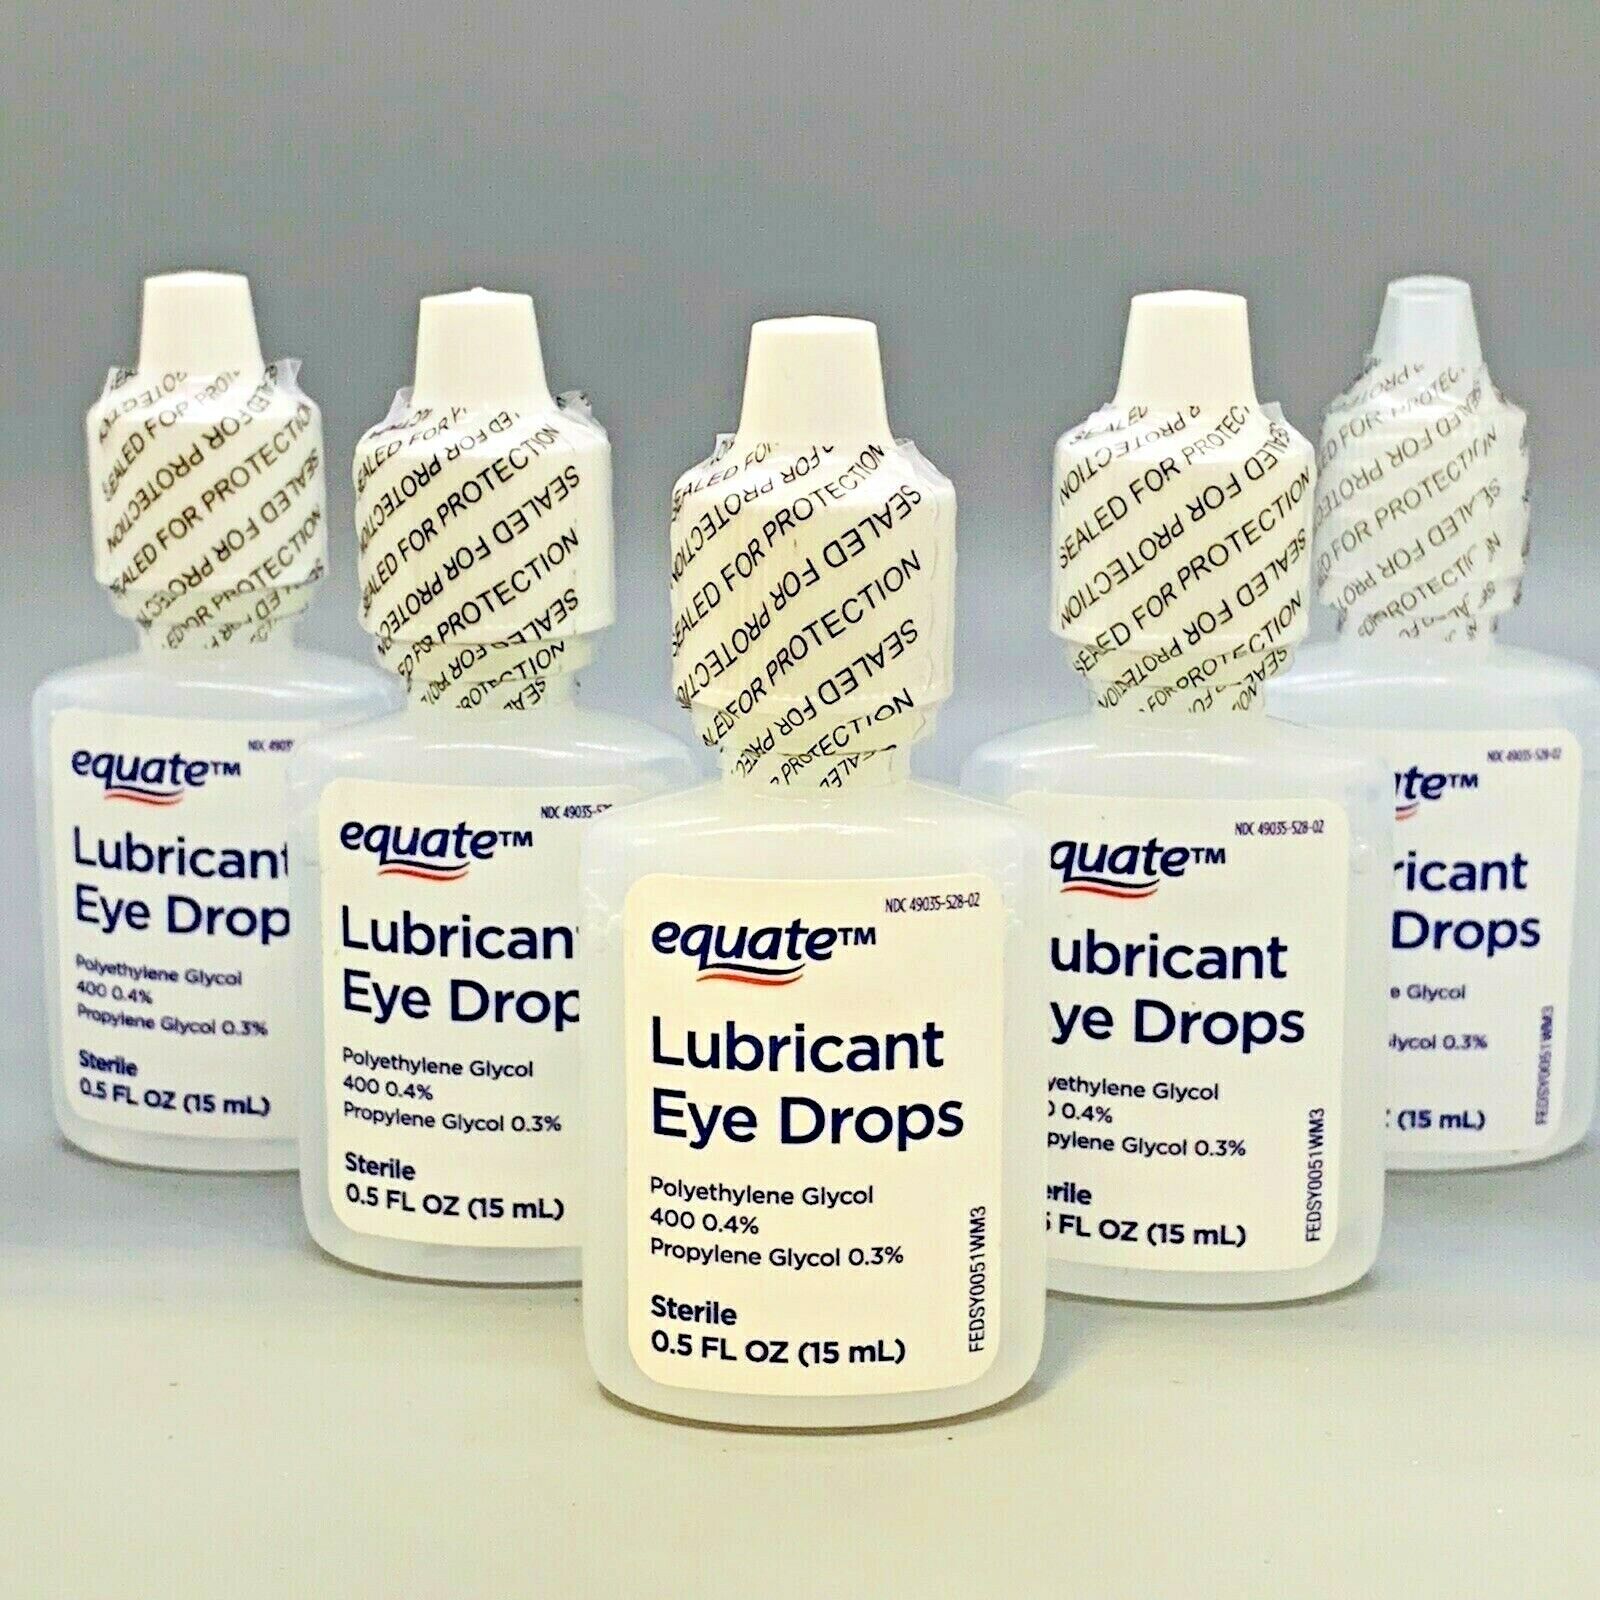 Equate Lubricant Eye Drops Irritation 5PK Exp 10/23+ EQUATE Does Not Apply